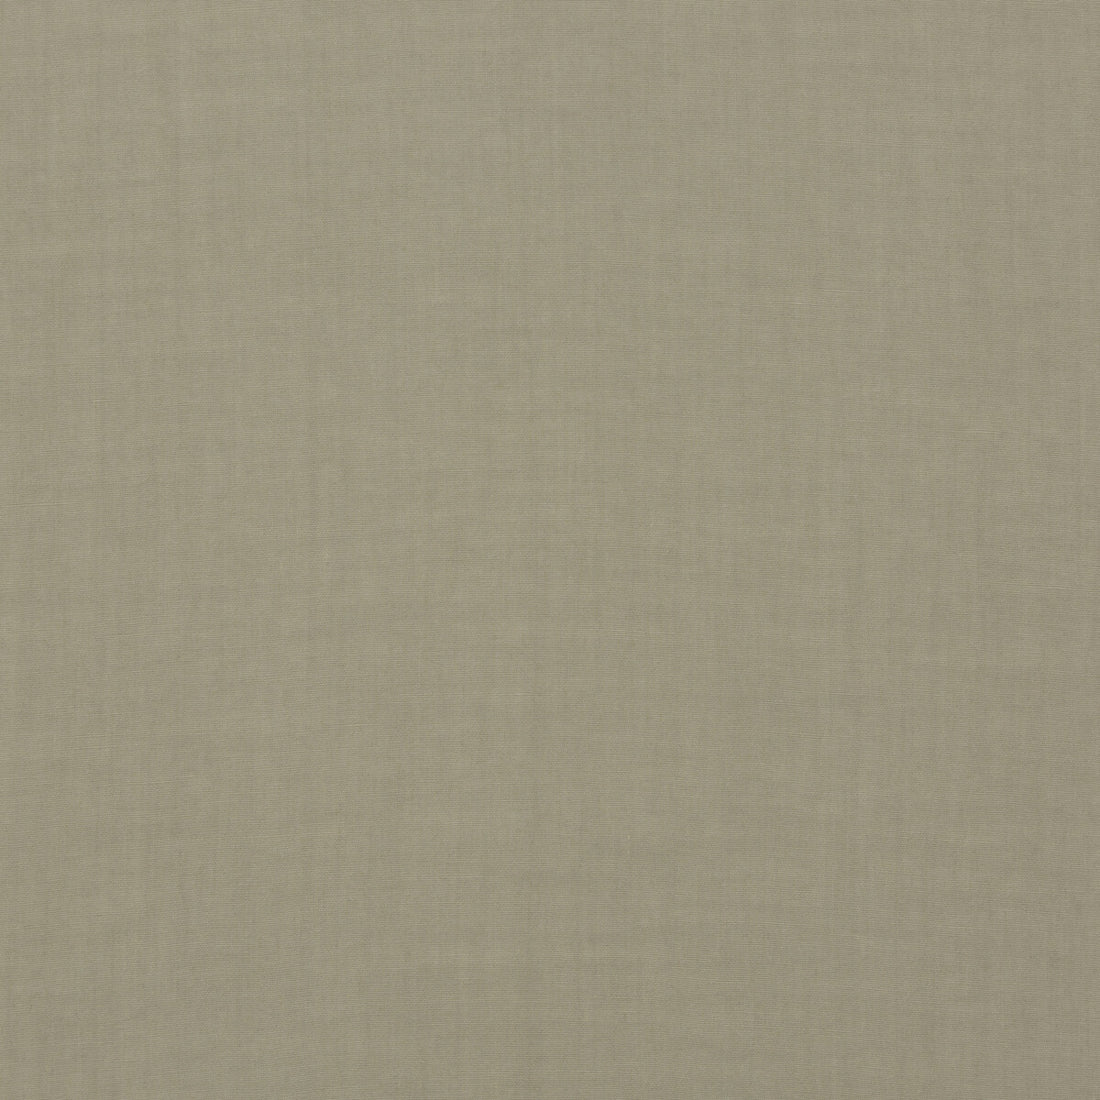 Meridian Linen fabric in putty color - pattern ED85281.107.0 - by Threads in the Meridian collection